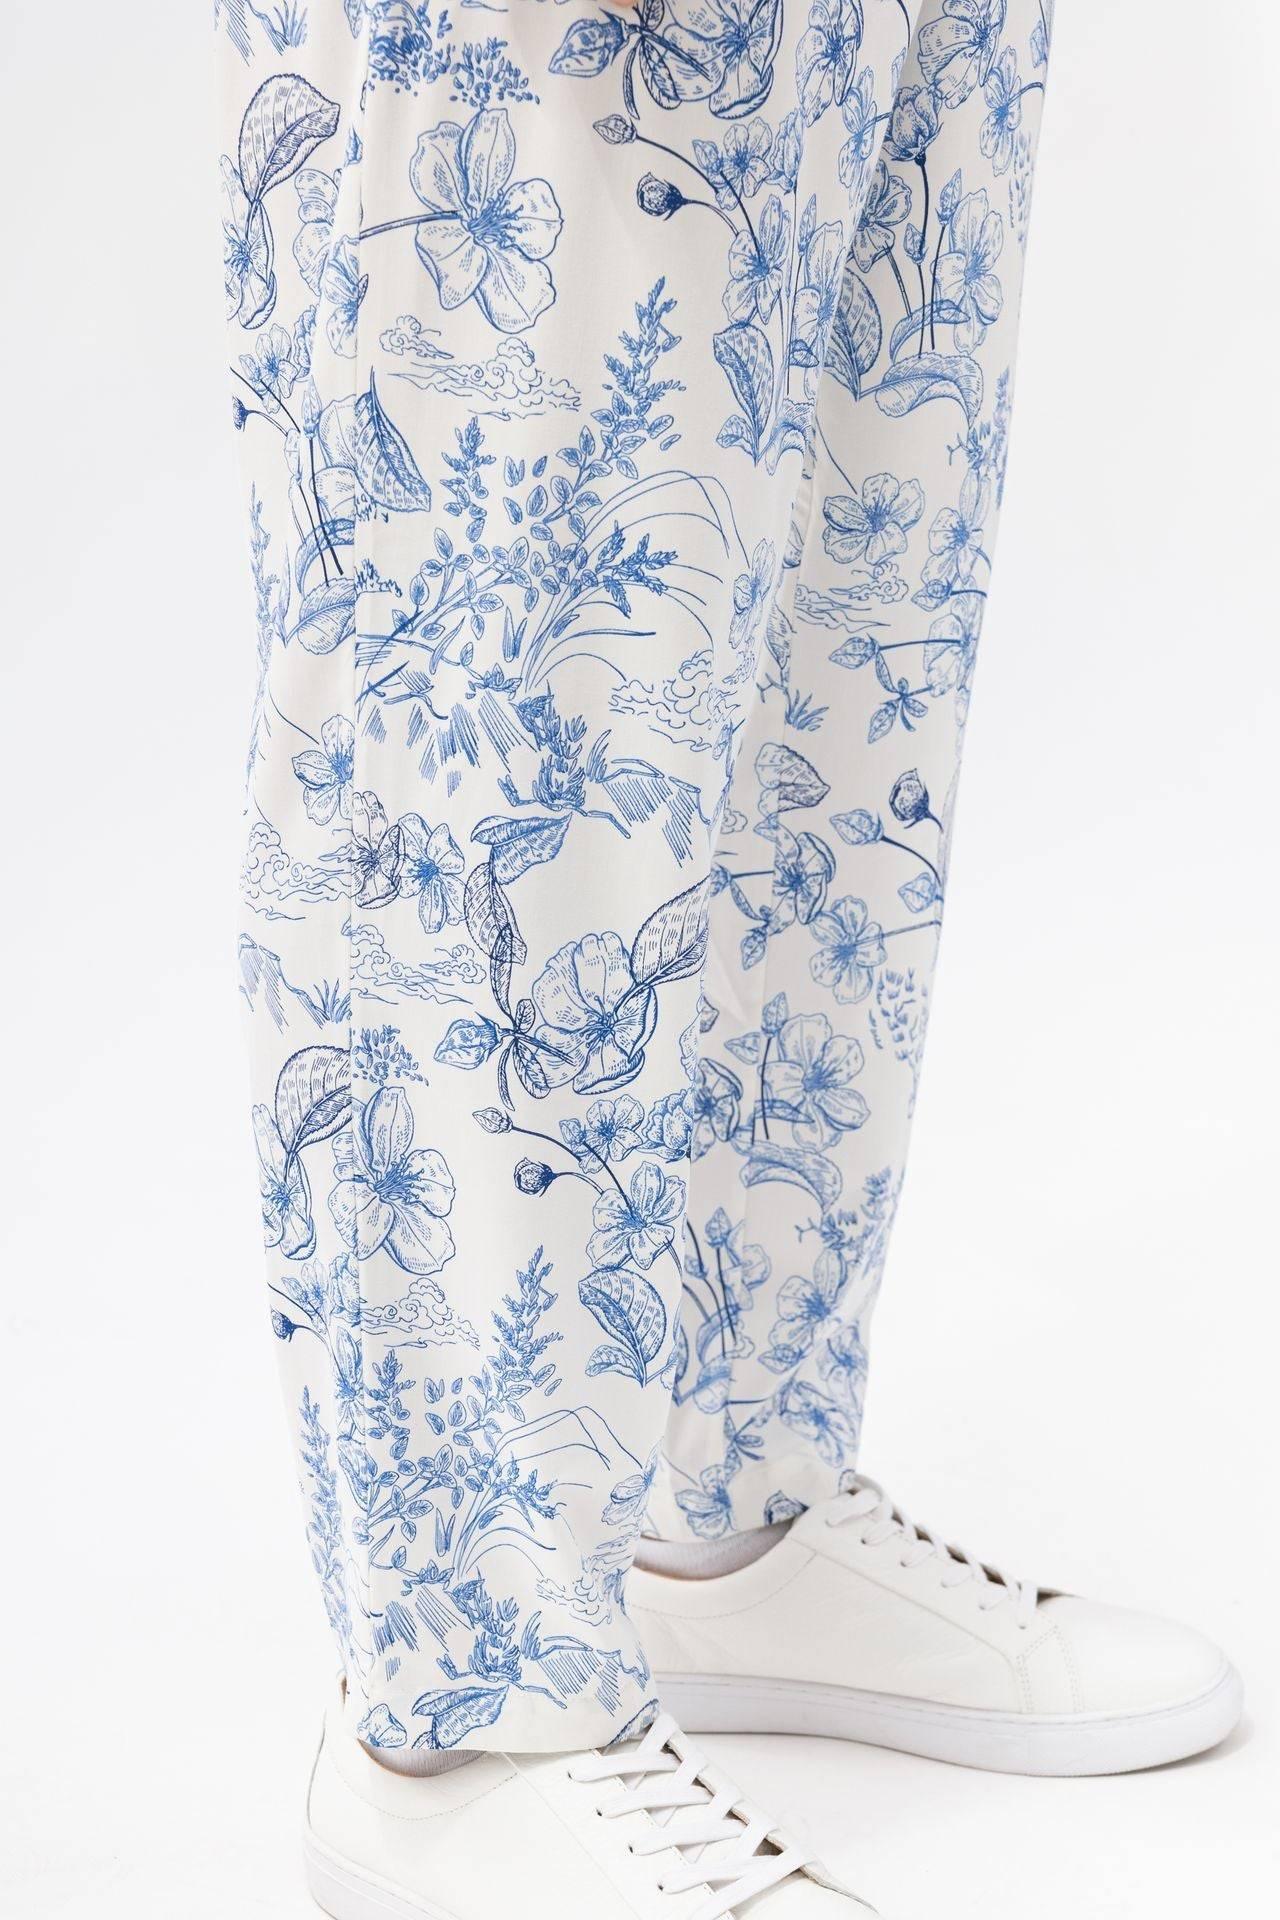 Relax Patterned Pants